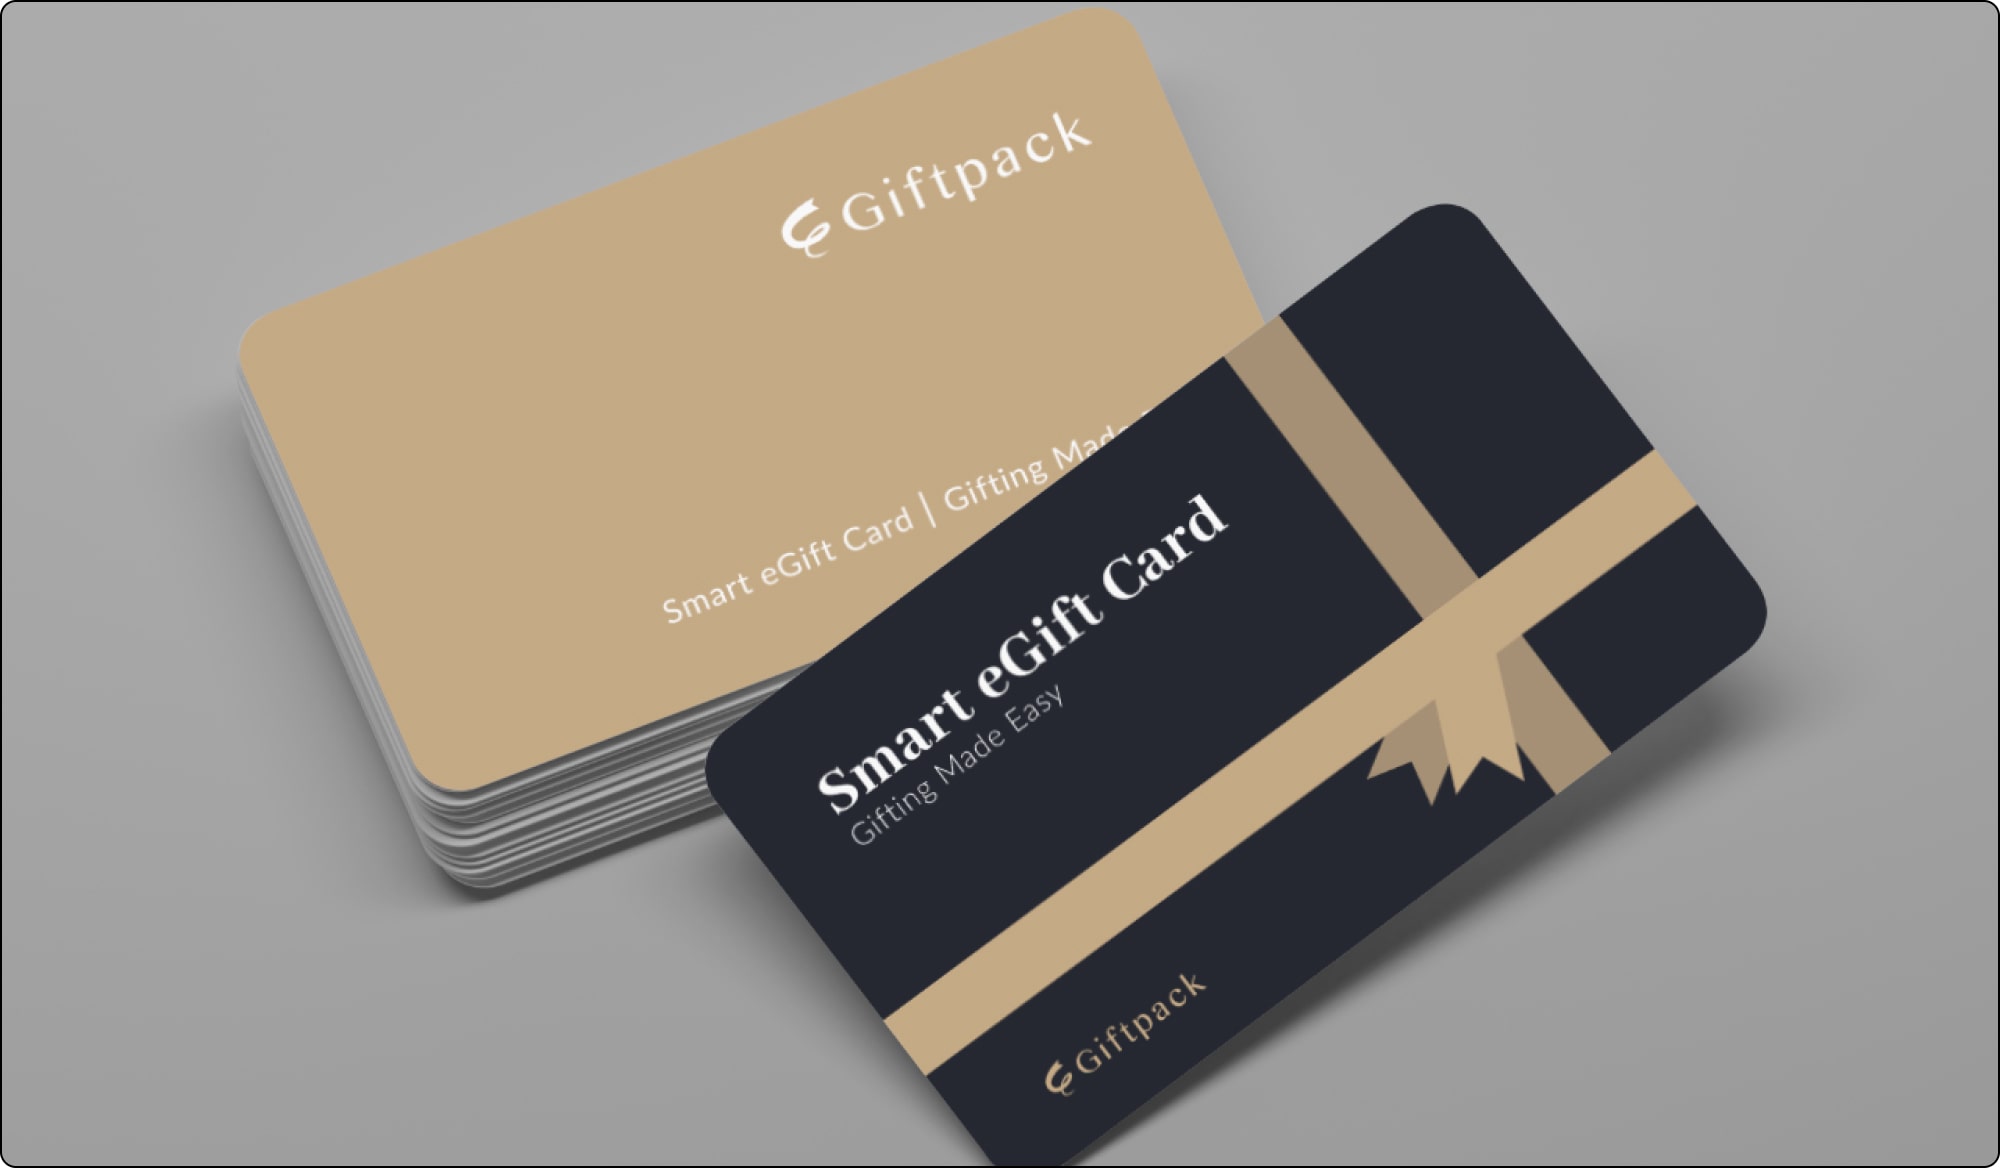 giftpack smart egift card for 350 brands to answer the question of 'Are Client Gifts Tax Deductible?'